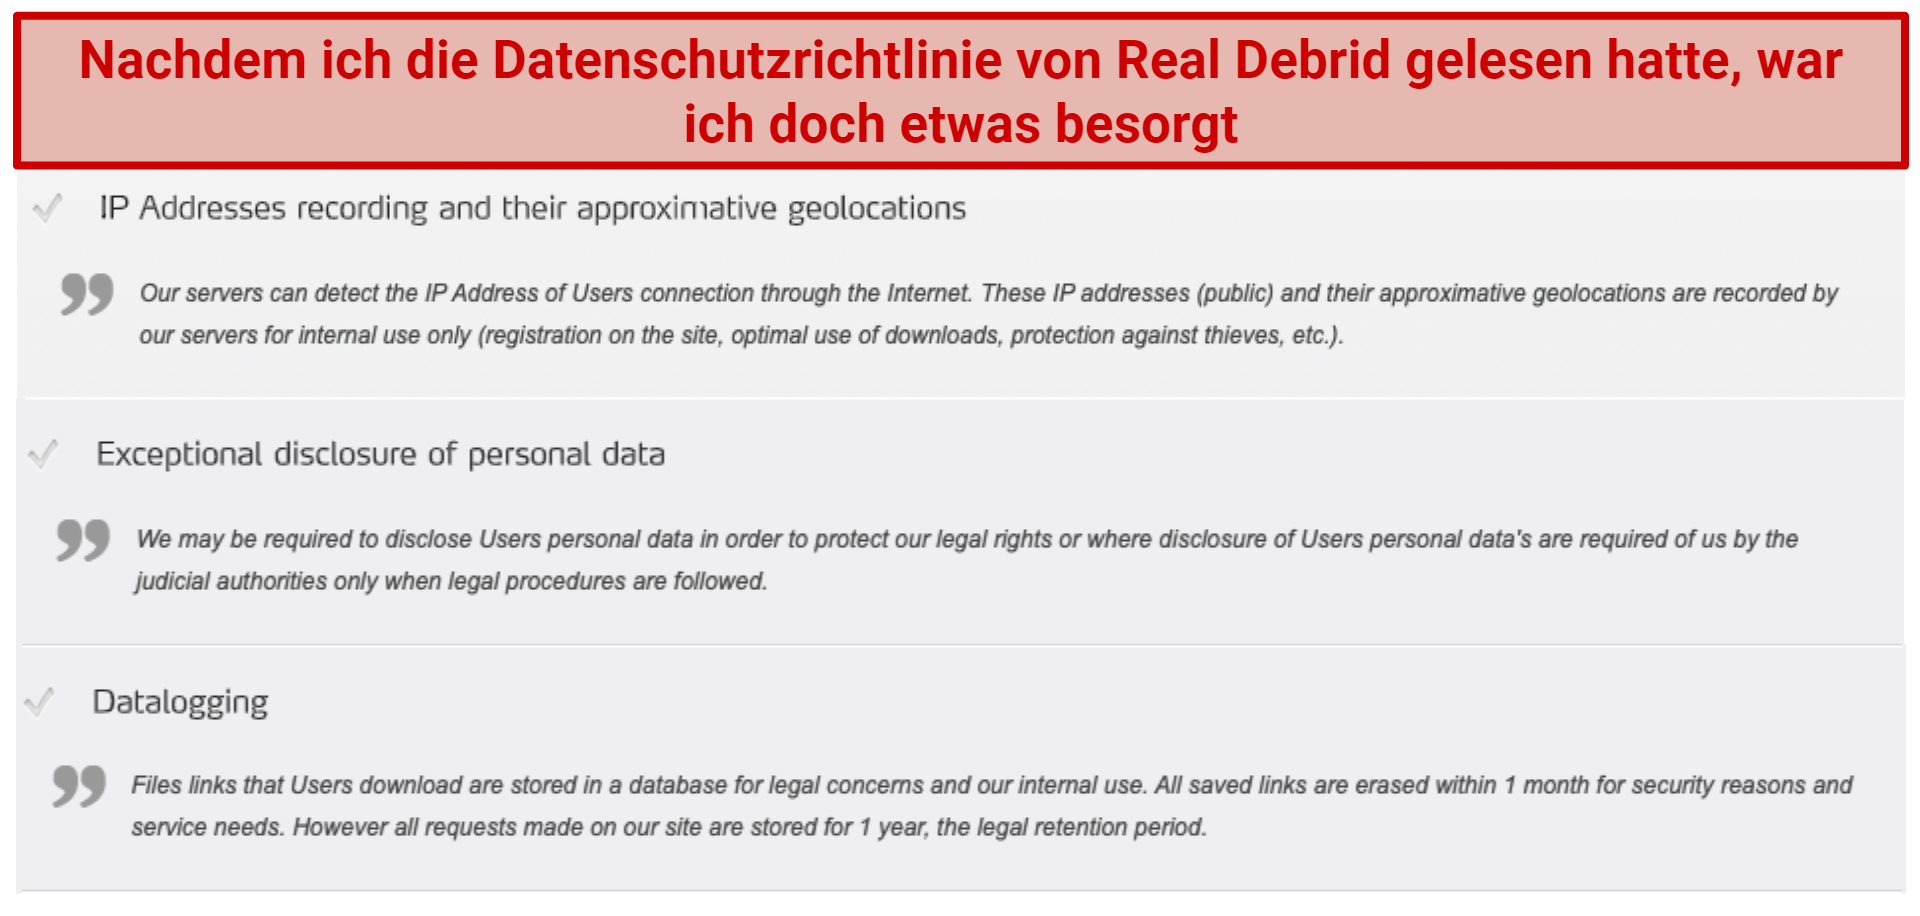 Graphic showing Real Debrid Privacy Policy